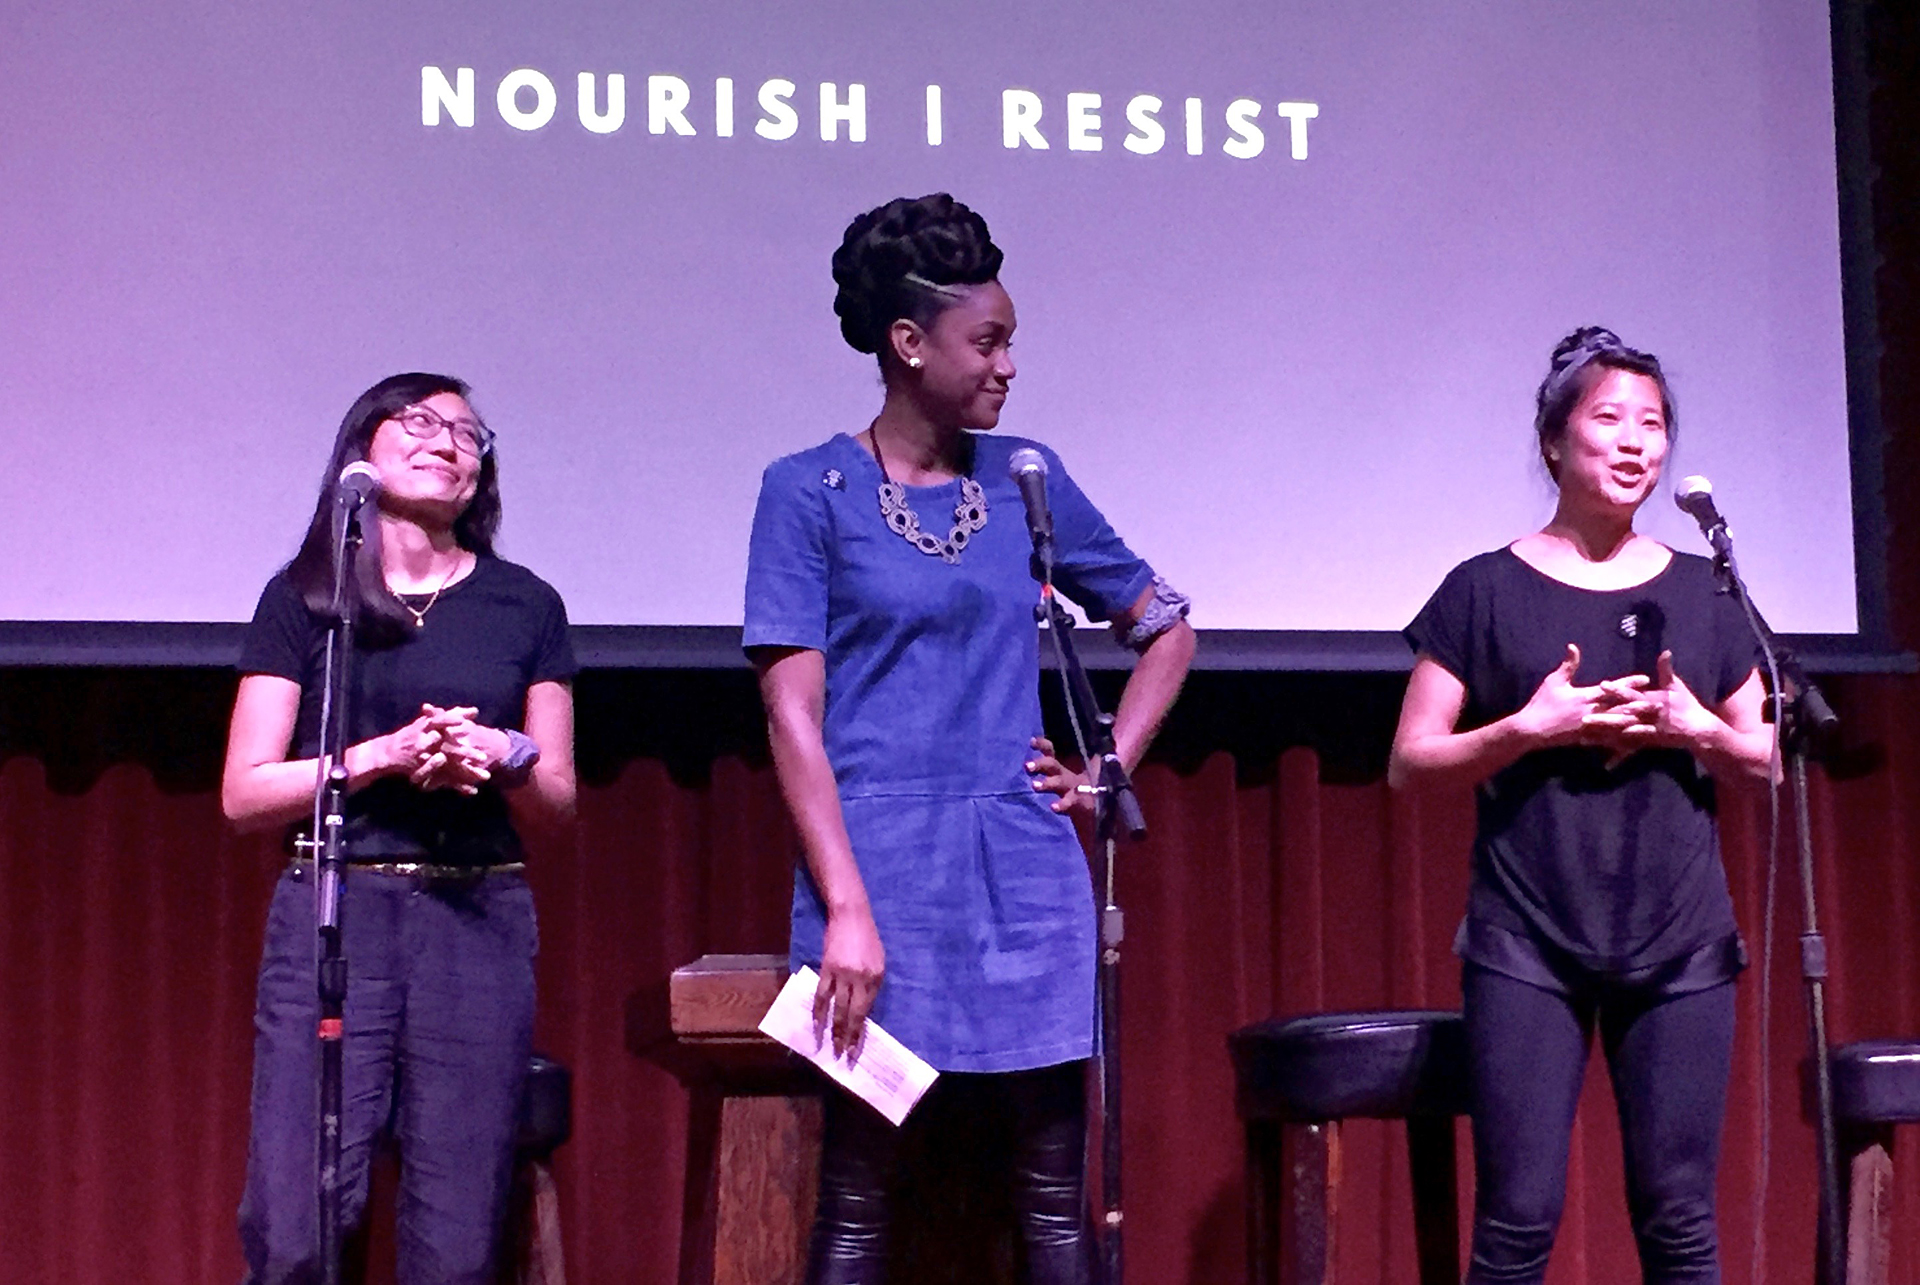 Three members of the woman-led collaborative of people of color, Nourish/Resist, who spoke about micro-aggressions, macro-impact, "staying woke" and creating safe spaces.